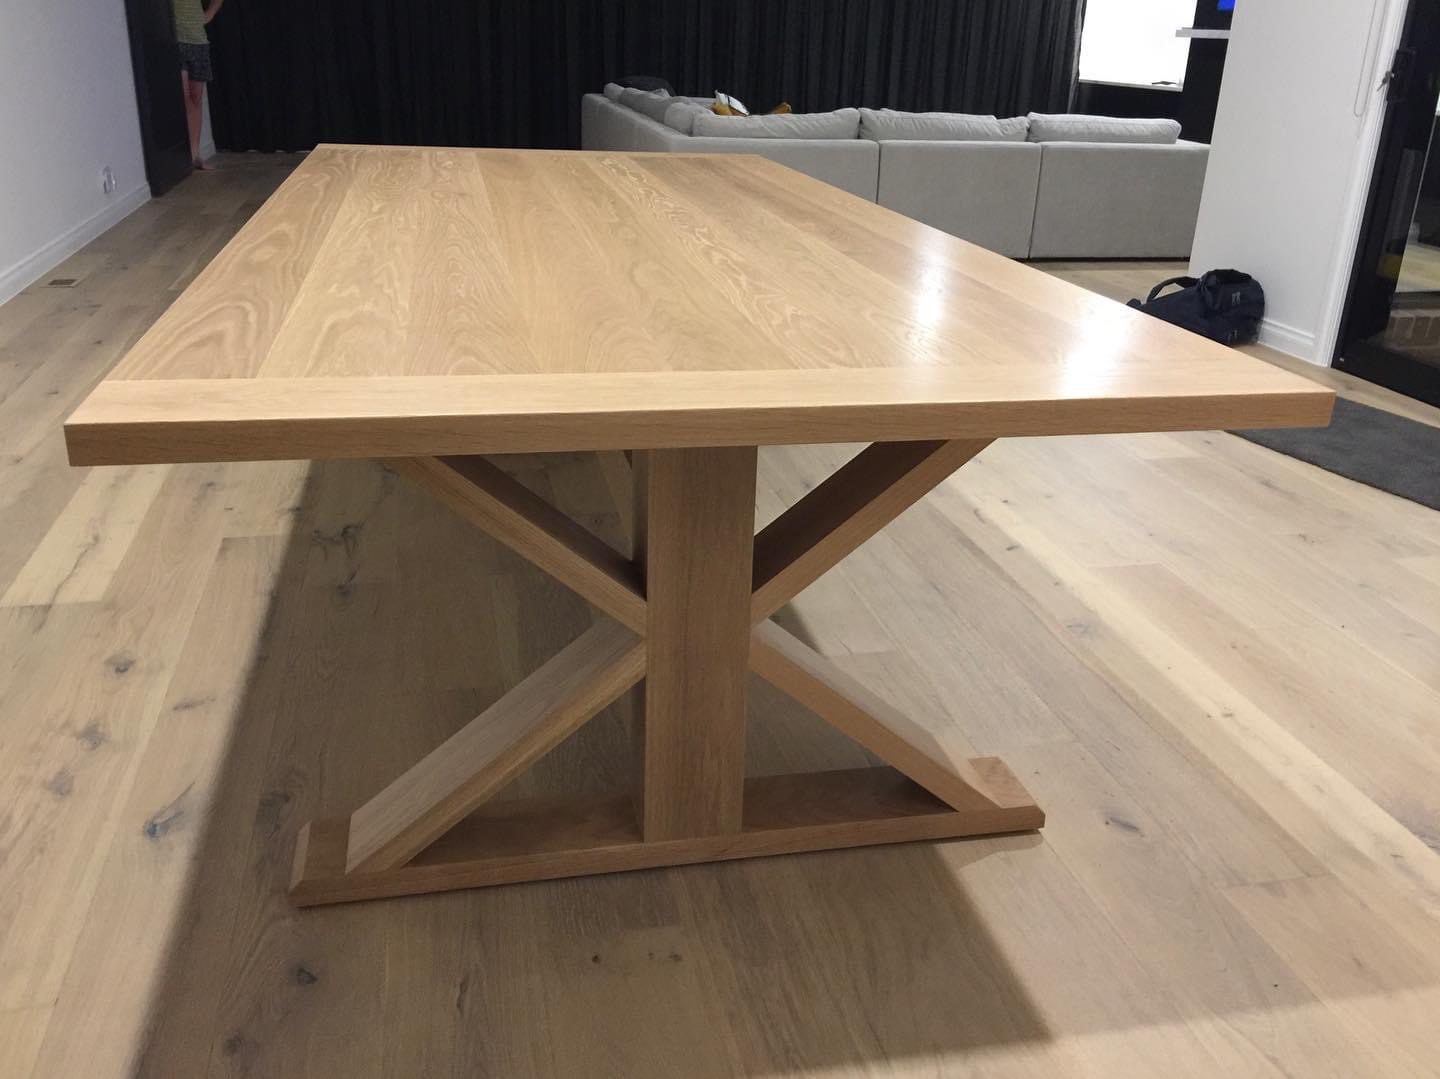 Provincial Dining Table